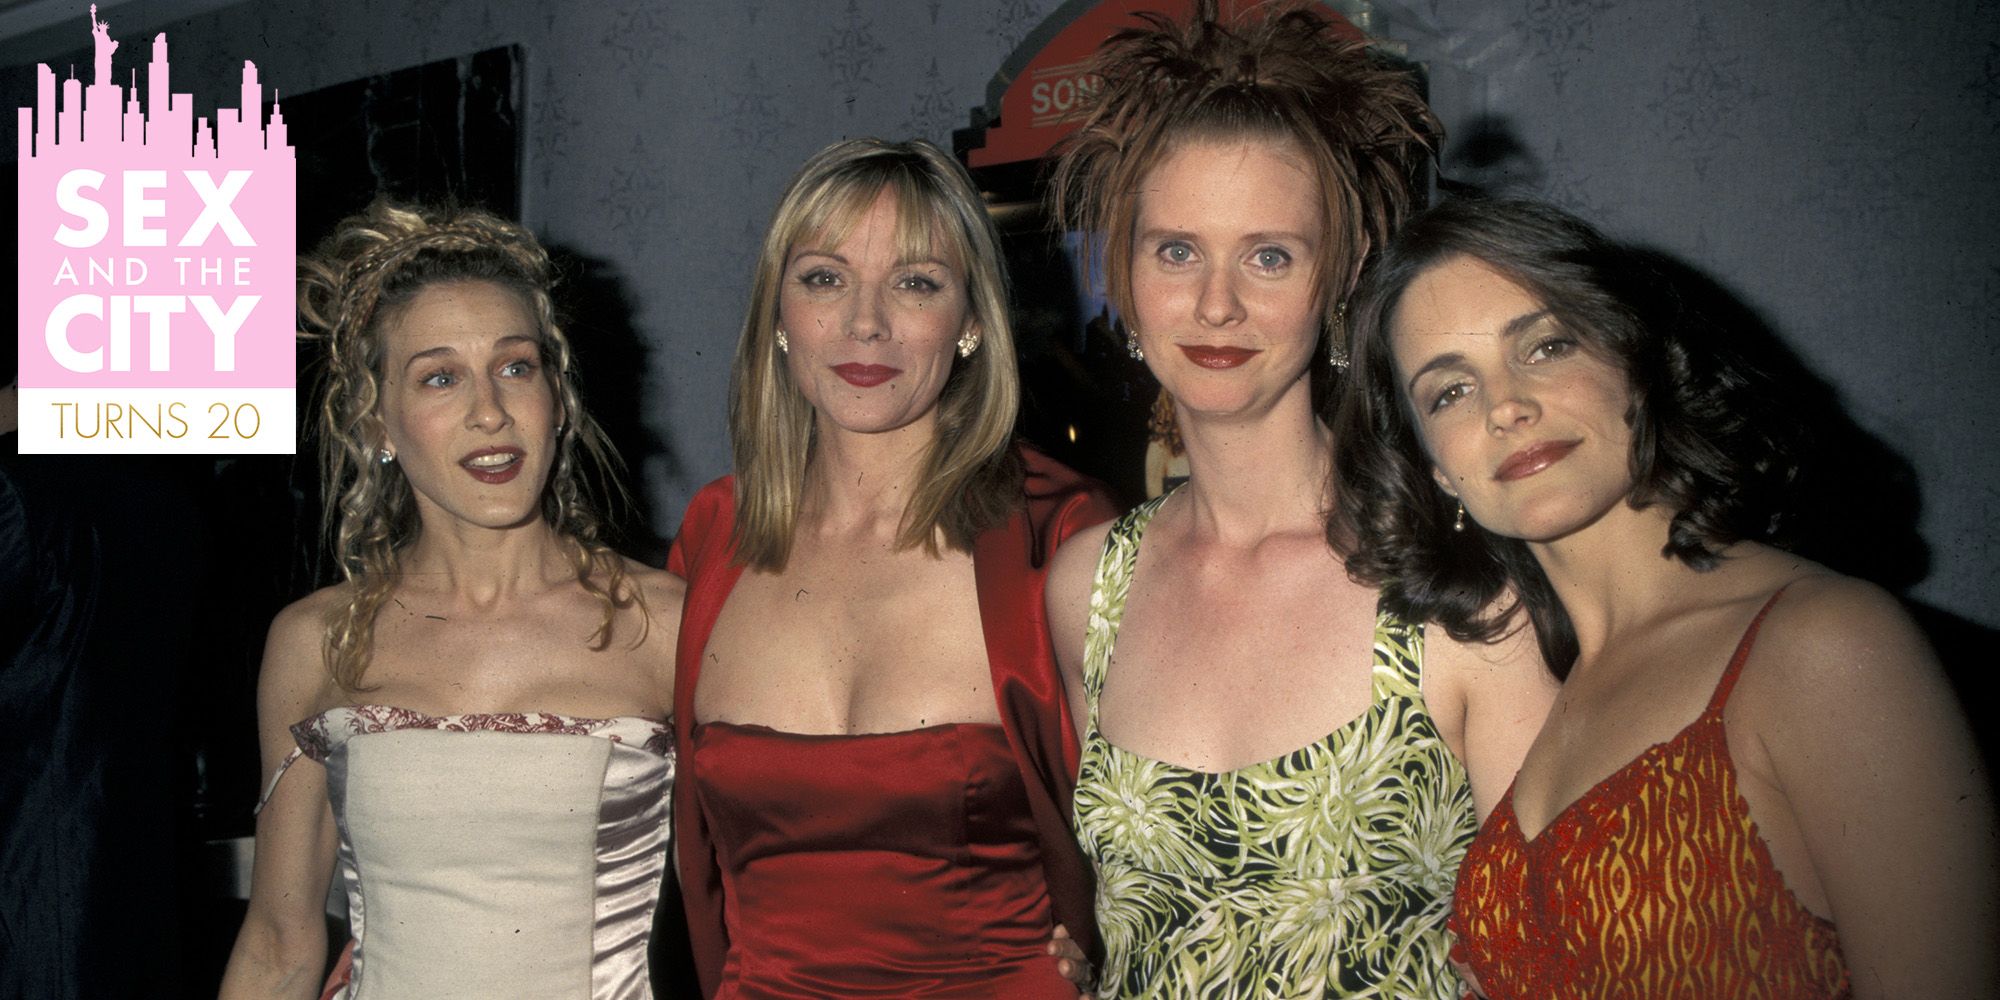 Iconic Photos of the Sex and the City New York Premiere in 1998 